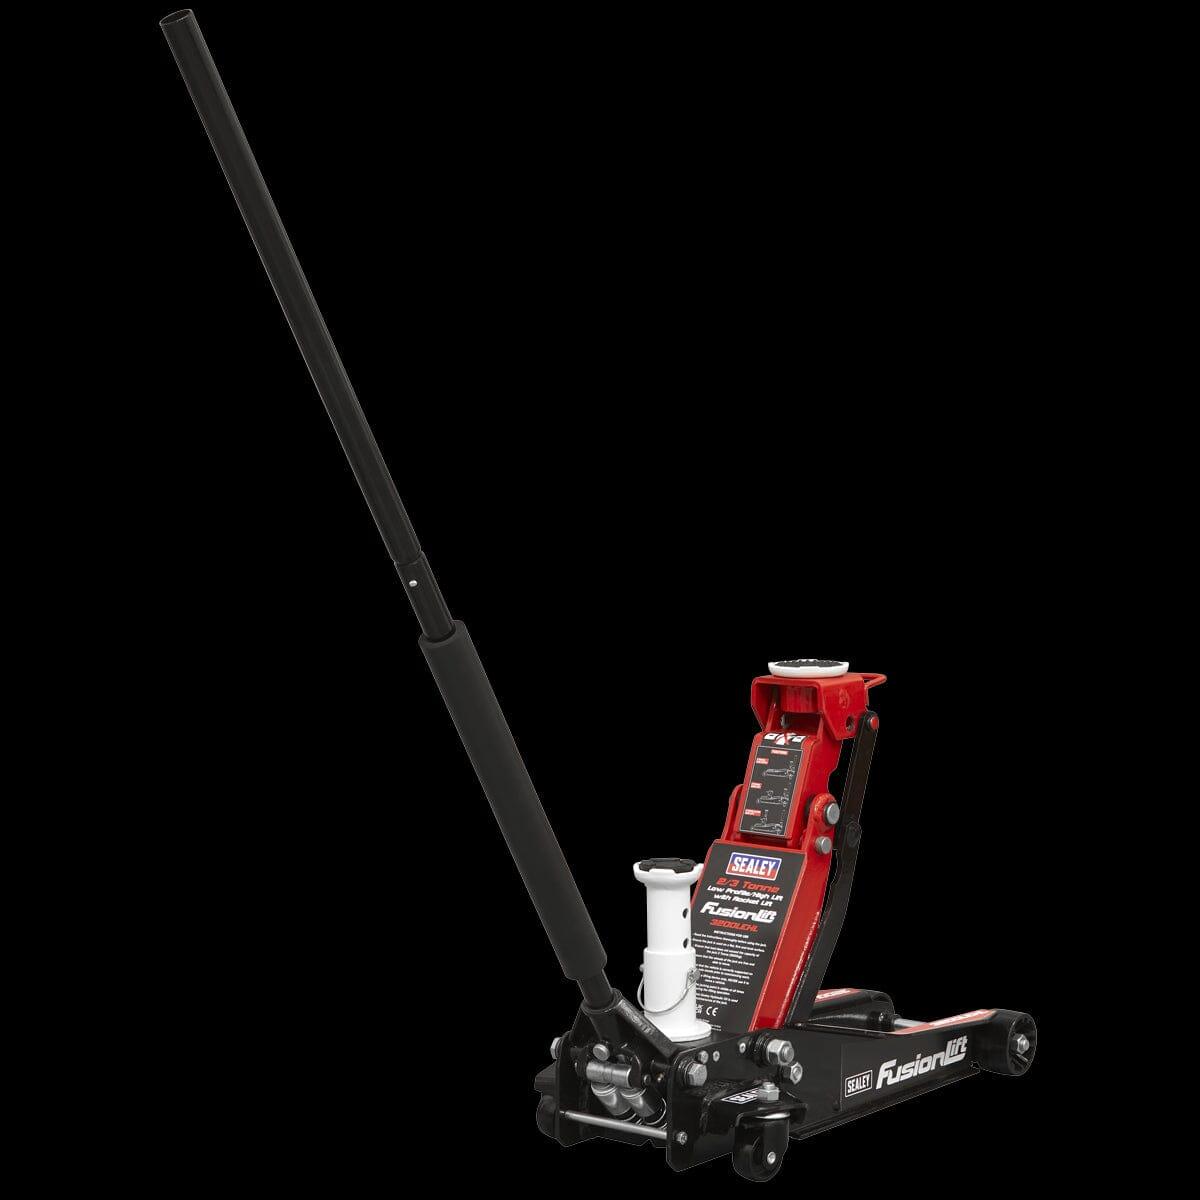 Sealey Trolley Jack 2/3 Tonne Low Profile/High Lift with Rocket Lift 3200LEHL - Tools 2U Direct SW